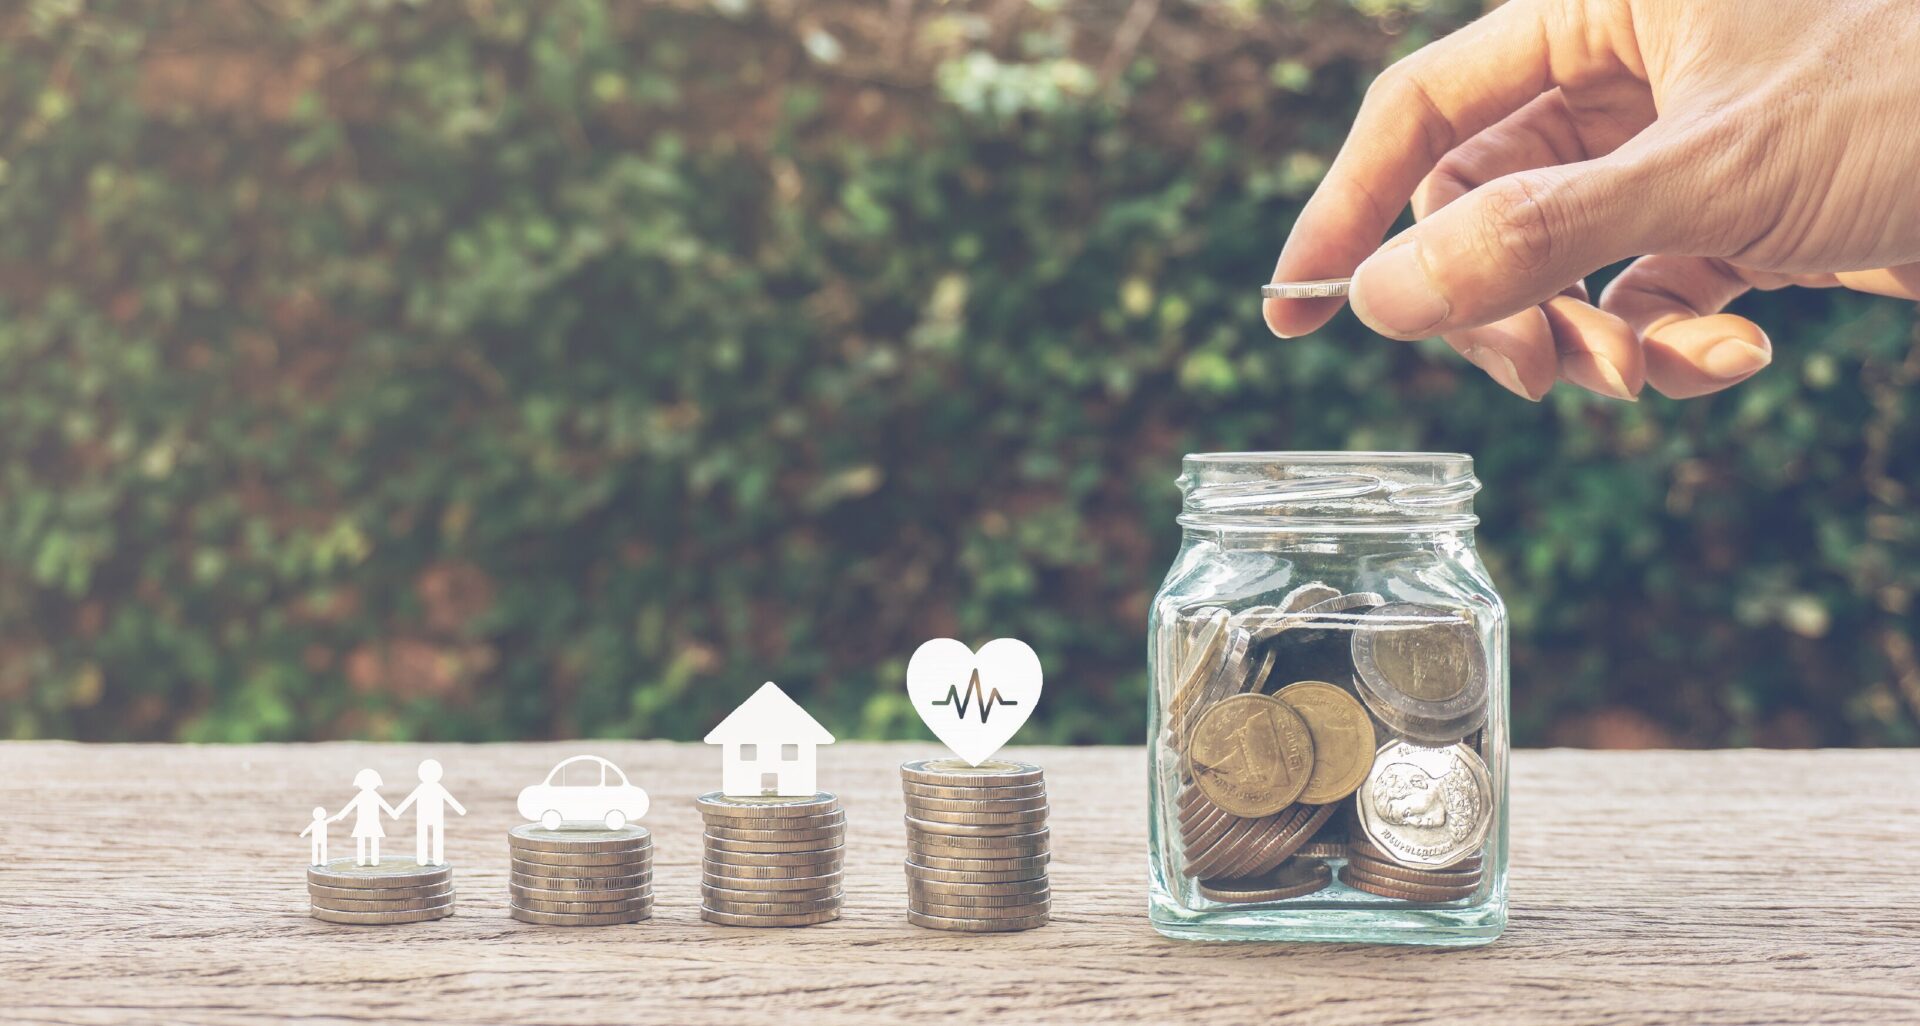 Time Well Spent: 5 Resources for Building Financial Capability